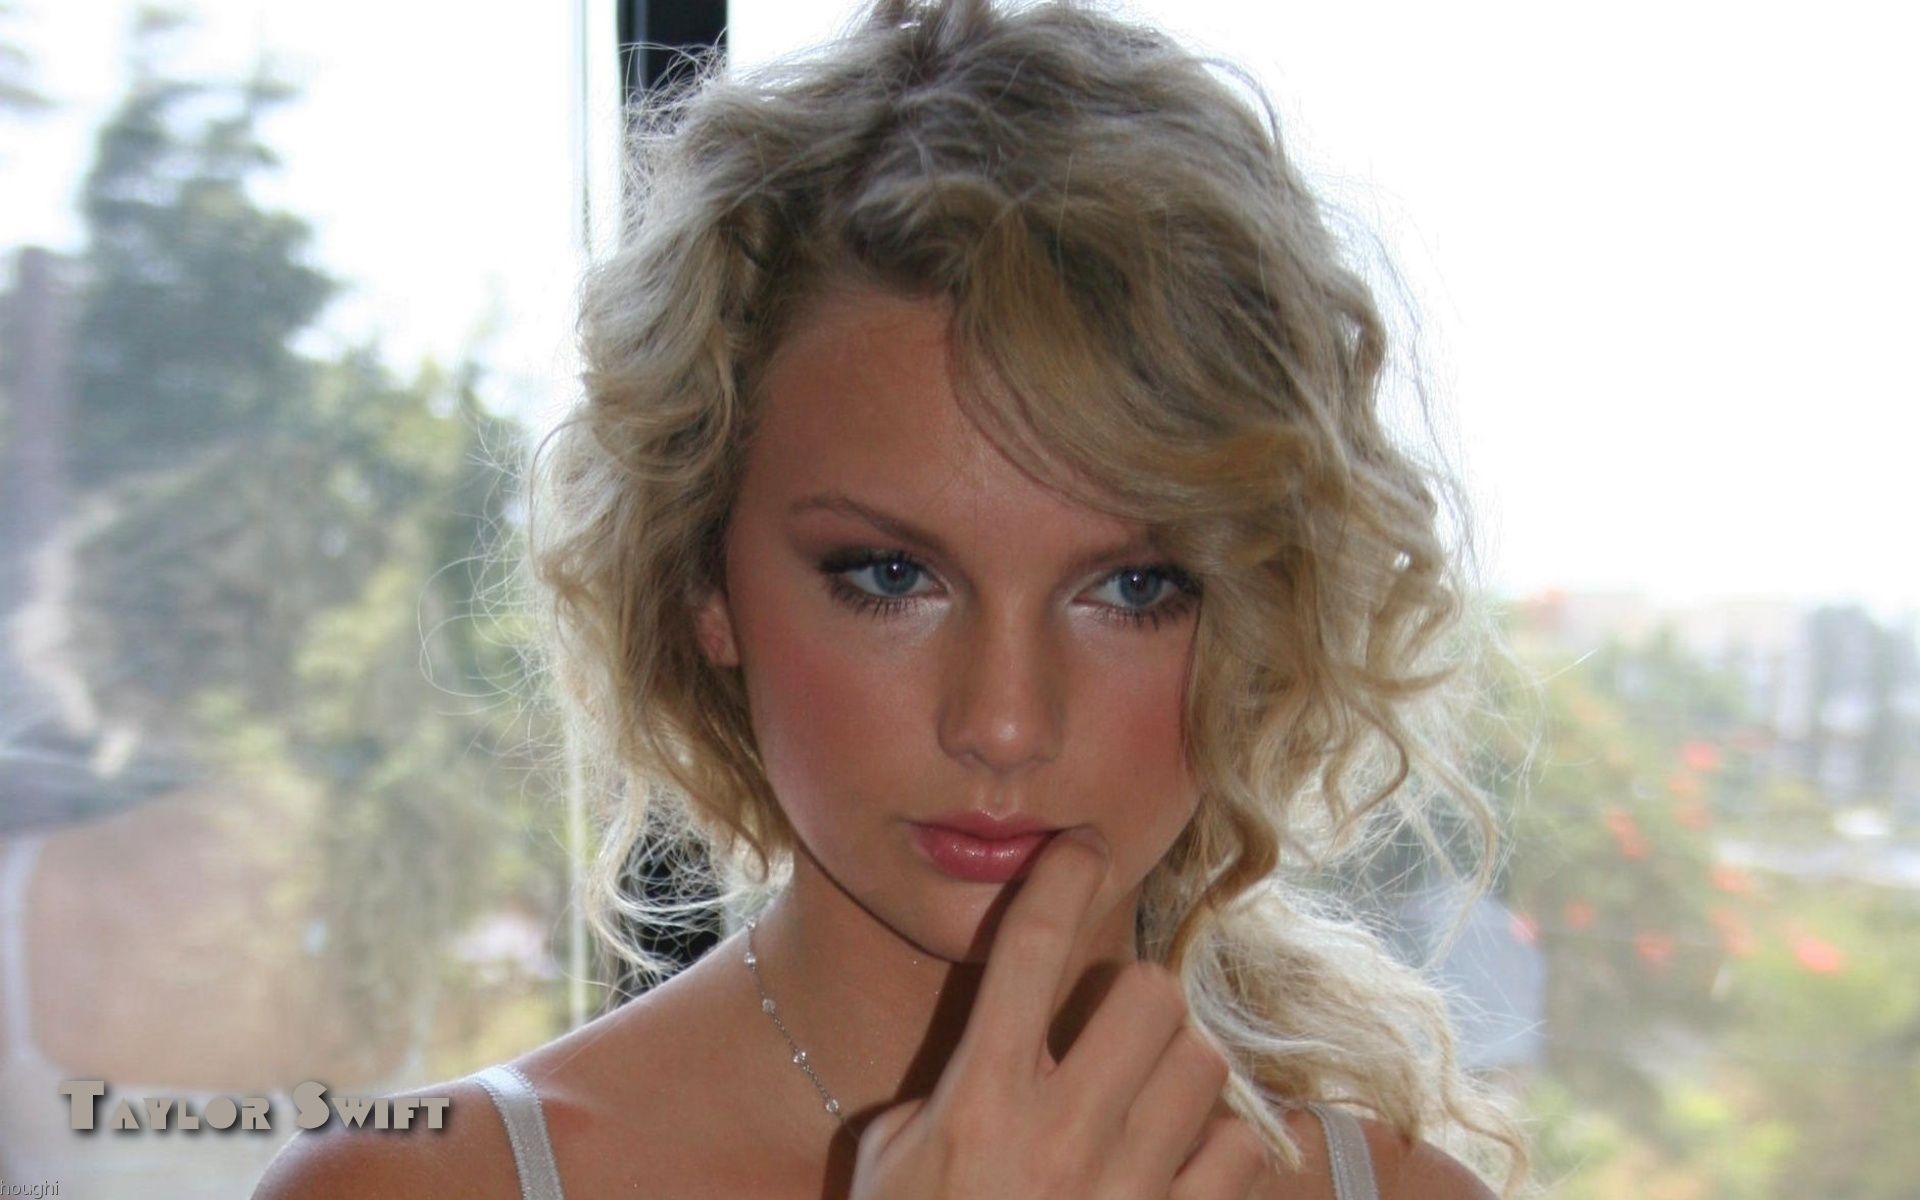 Taylor Swift #074 - 1920x1200 Wallpapers Pictures Photos Images